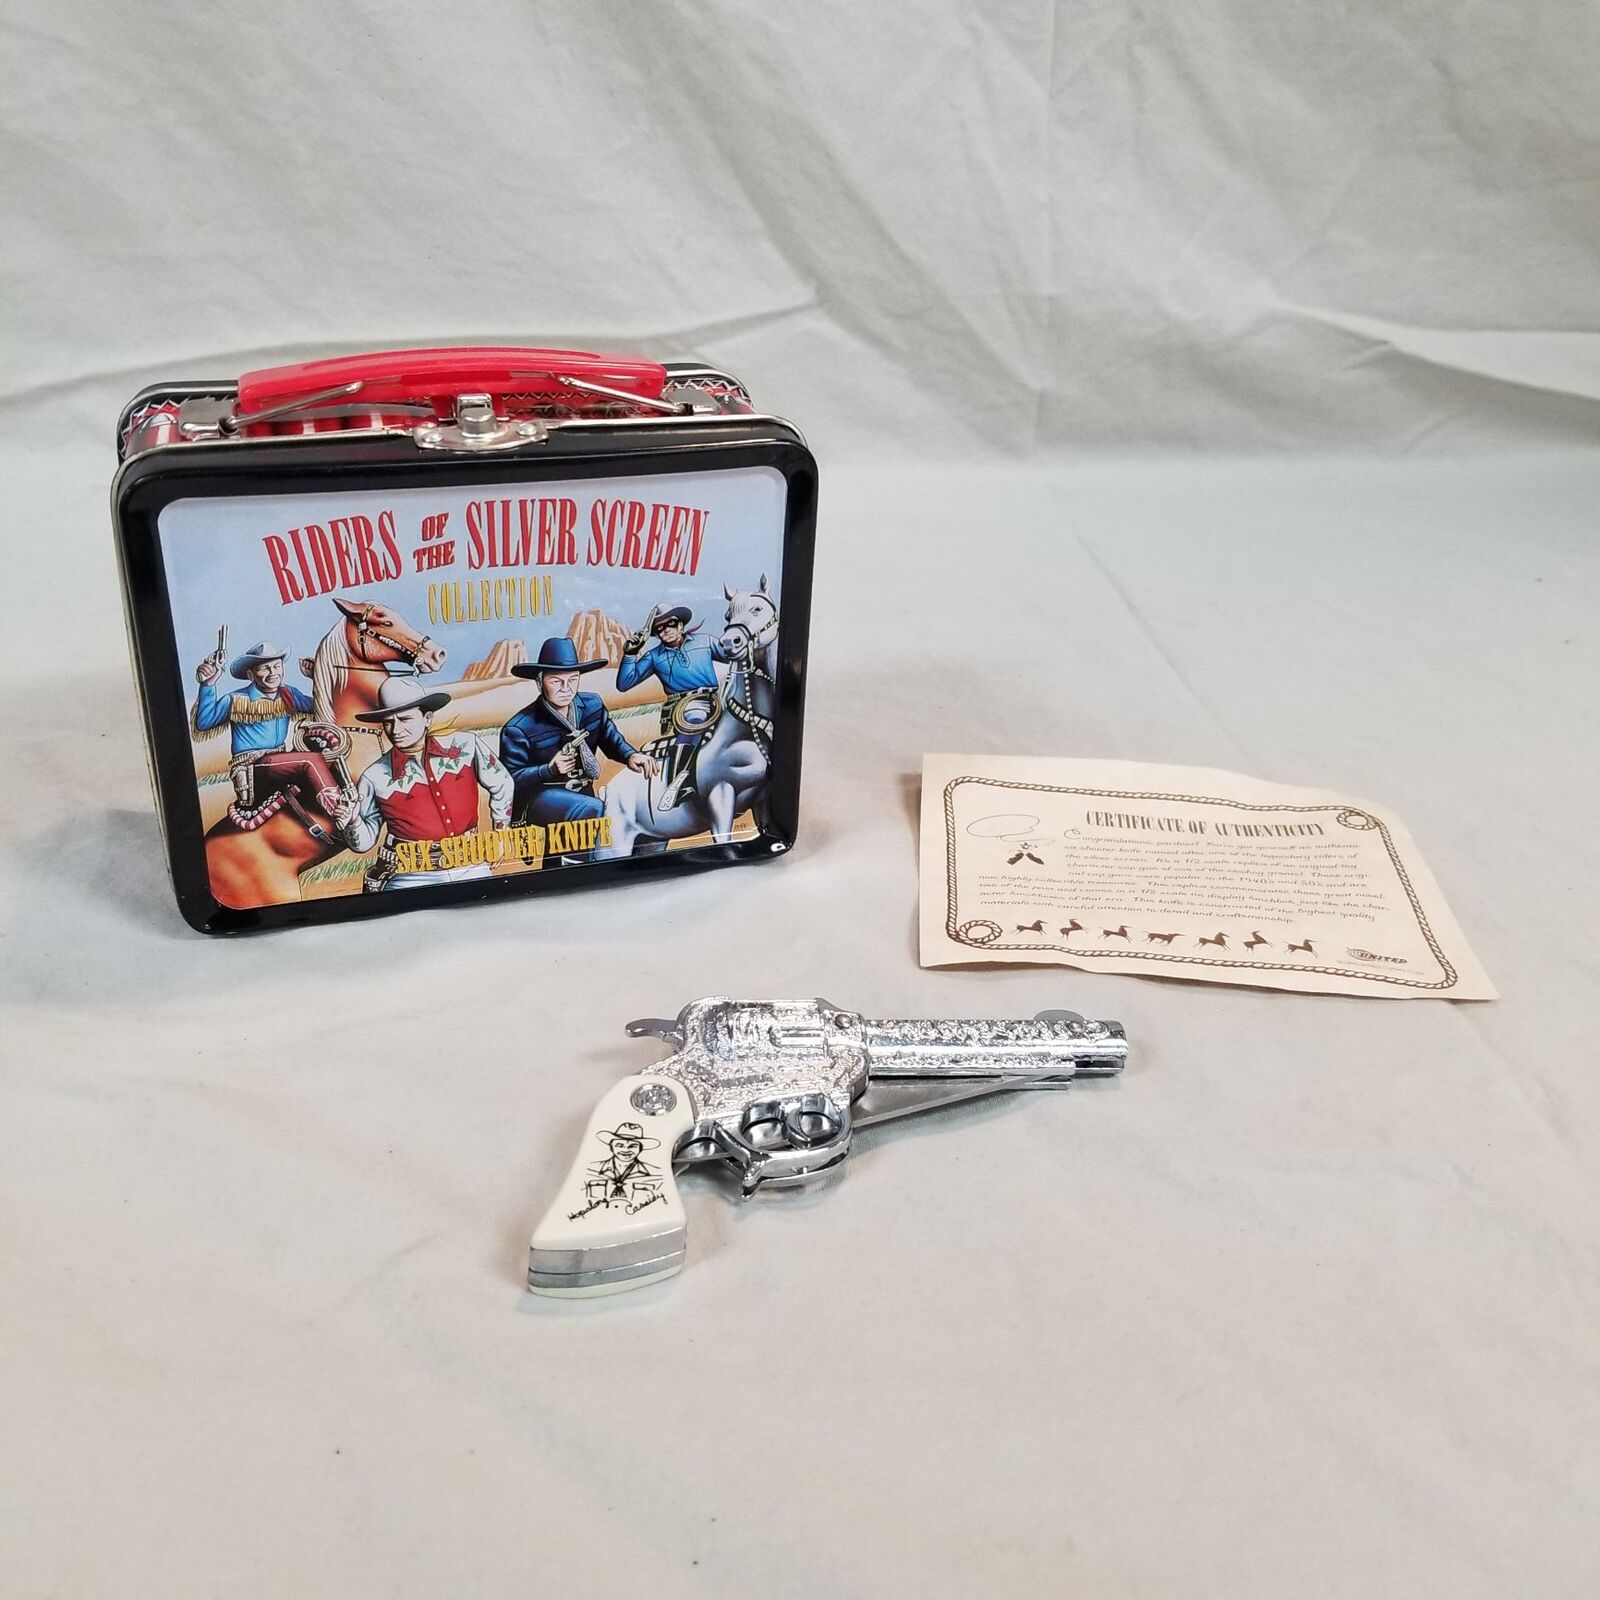 VTG Roy Rogers Six Shooter Knife Riders of the Silver Screen Collection 1990s